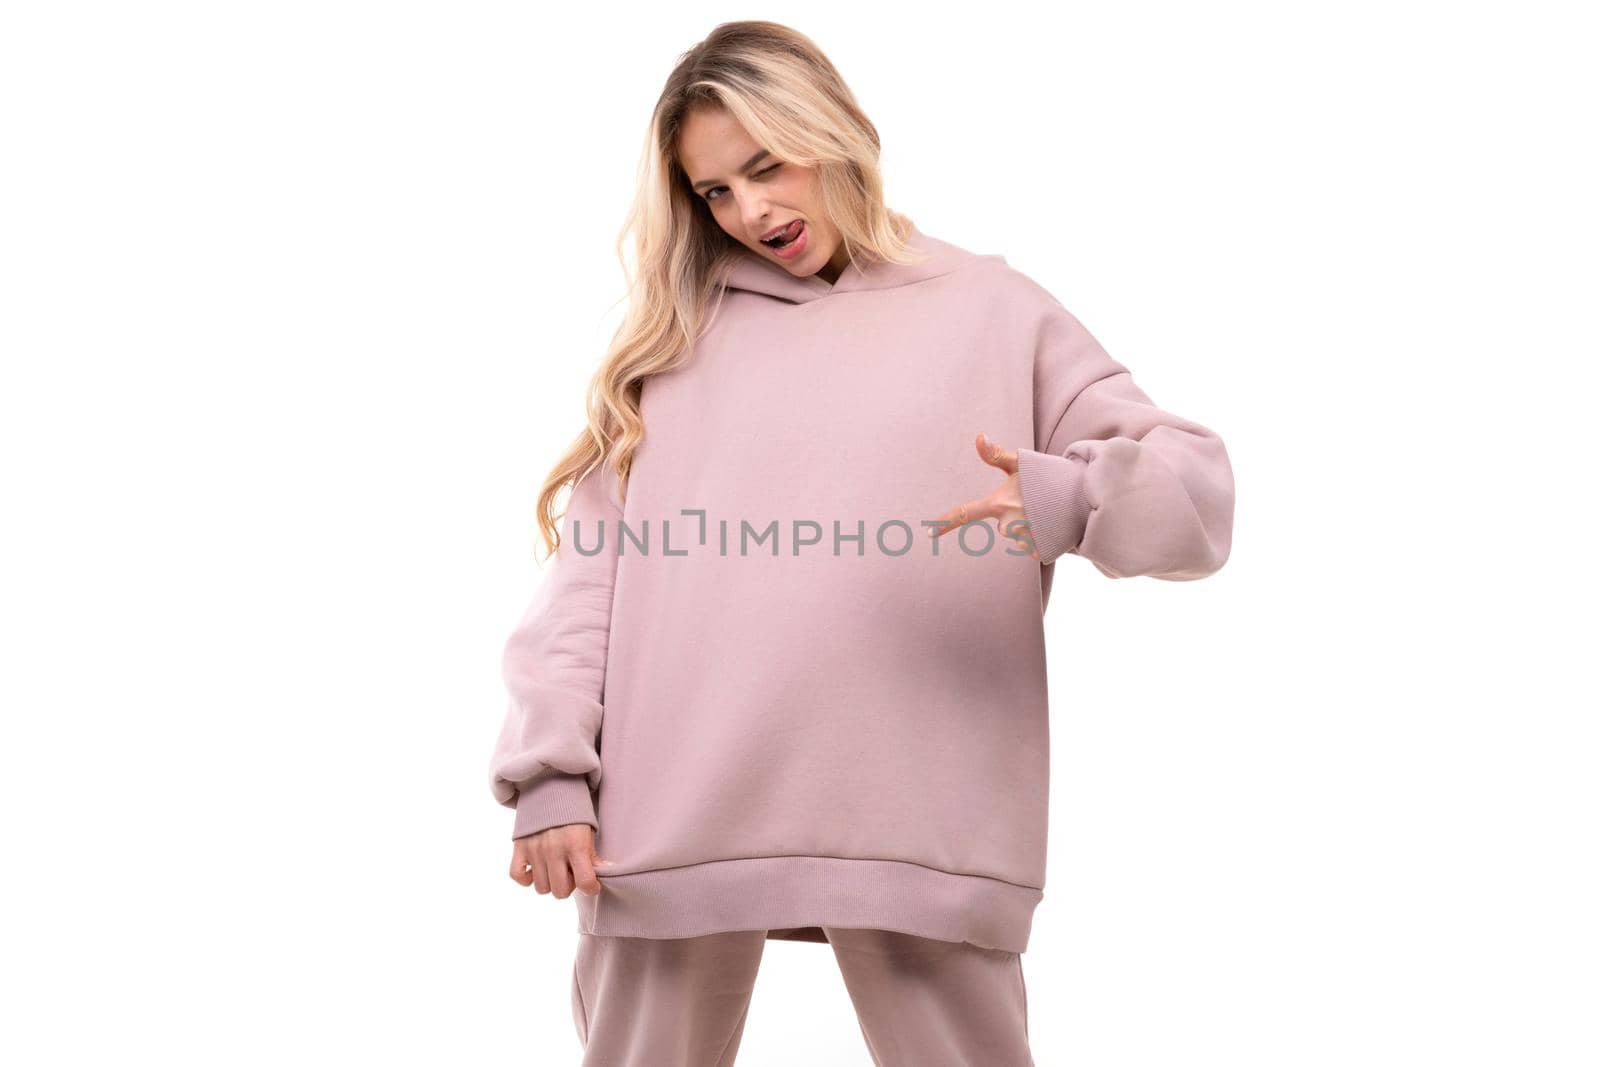 young woman in pink sports hoodie points her finger at the sweatshirt.